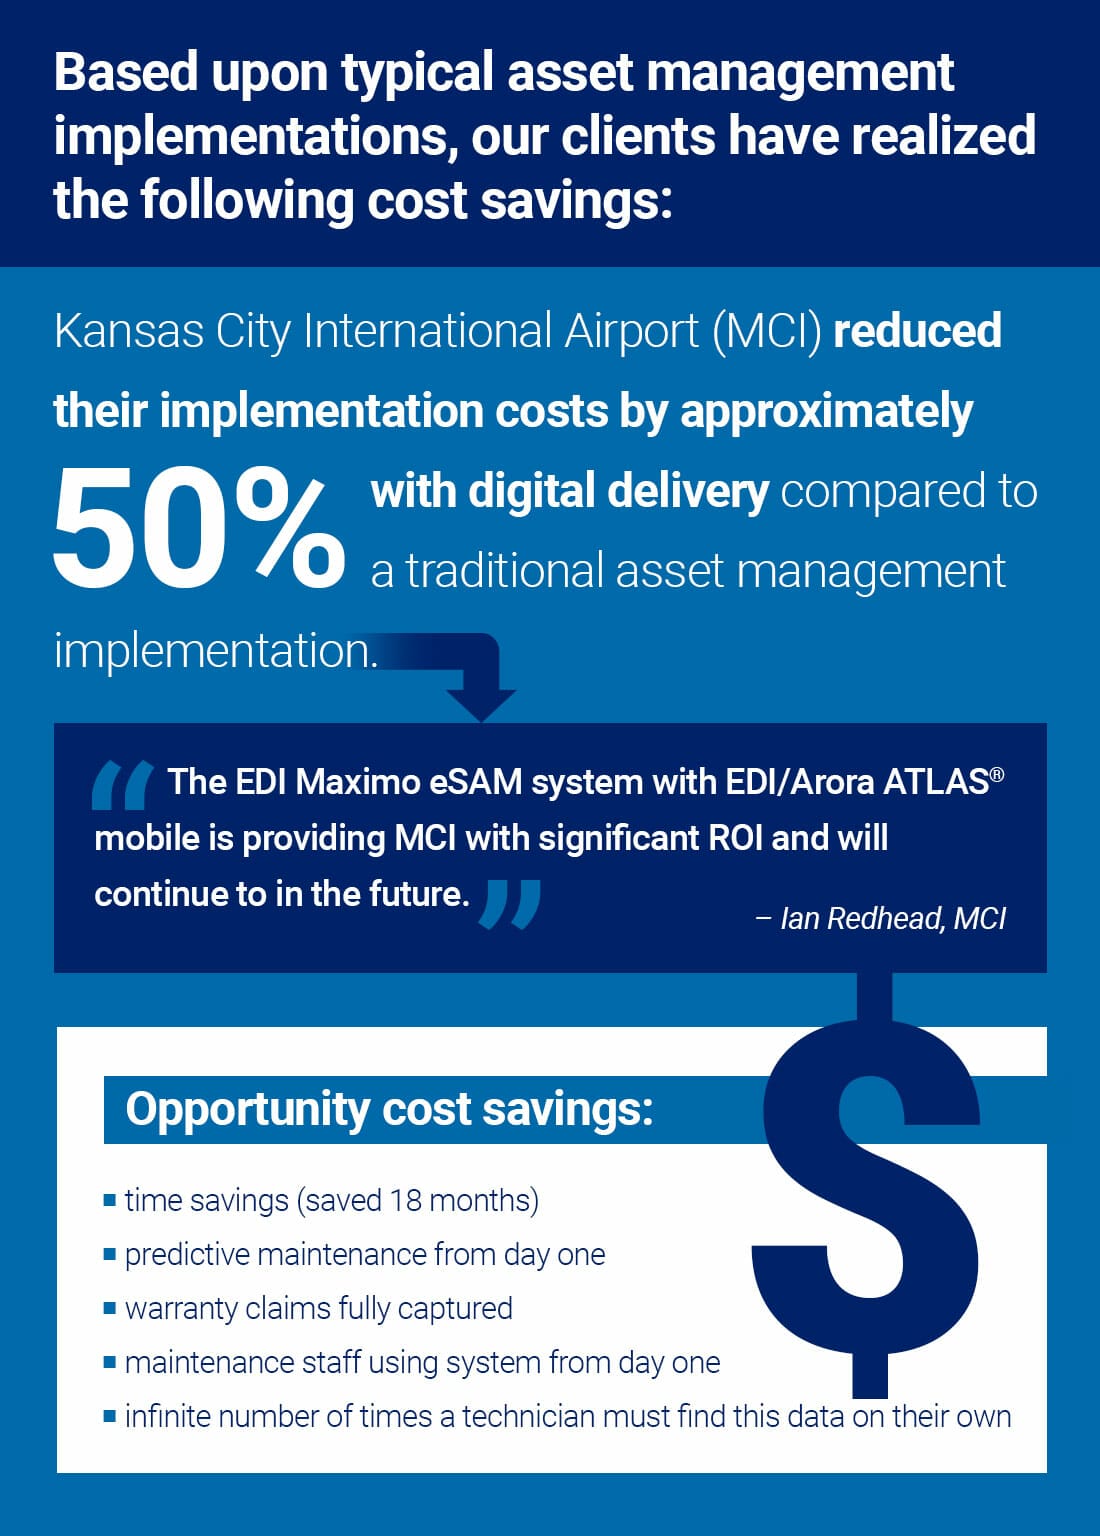 MCI saved 50% on implementation costs with digital delivery